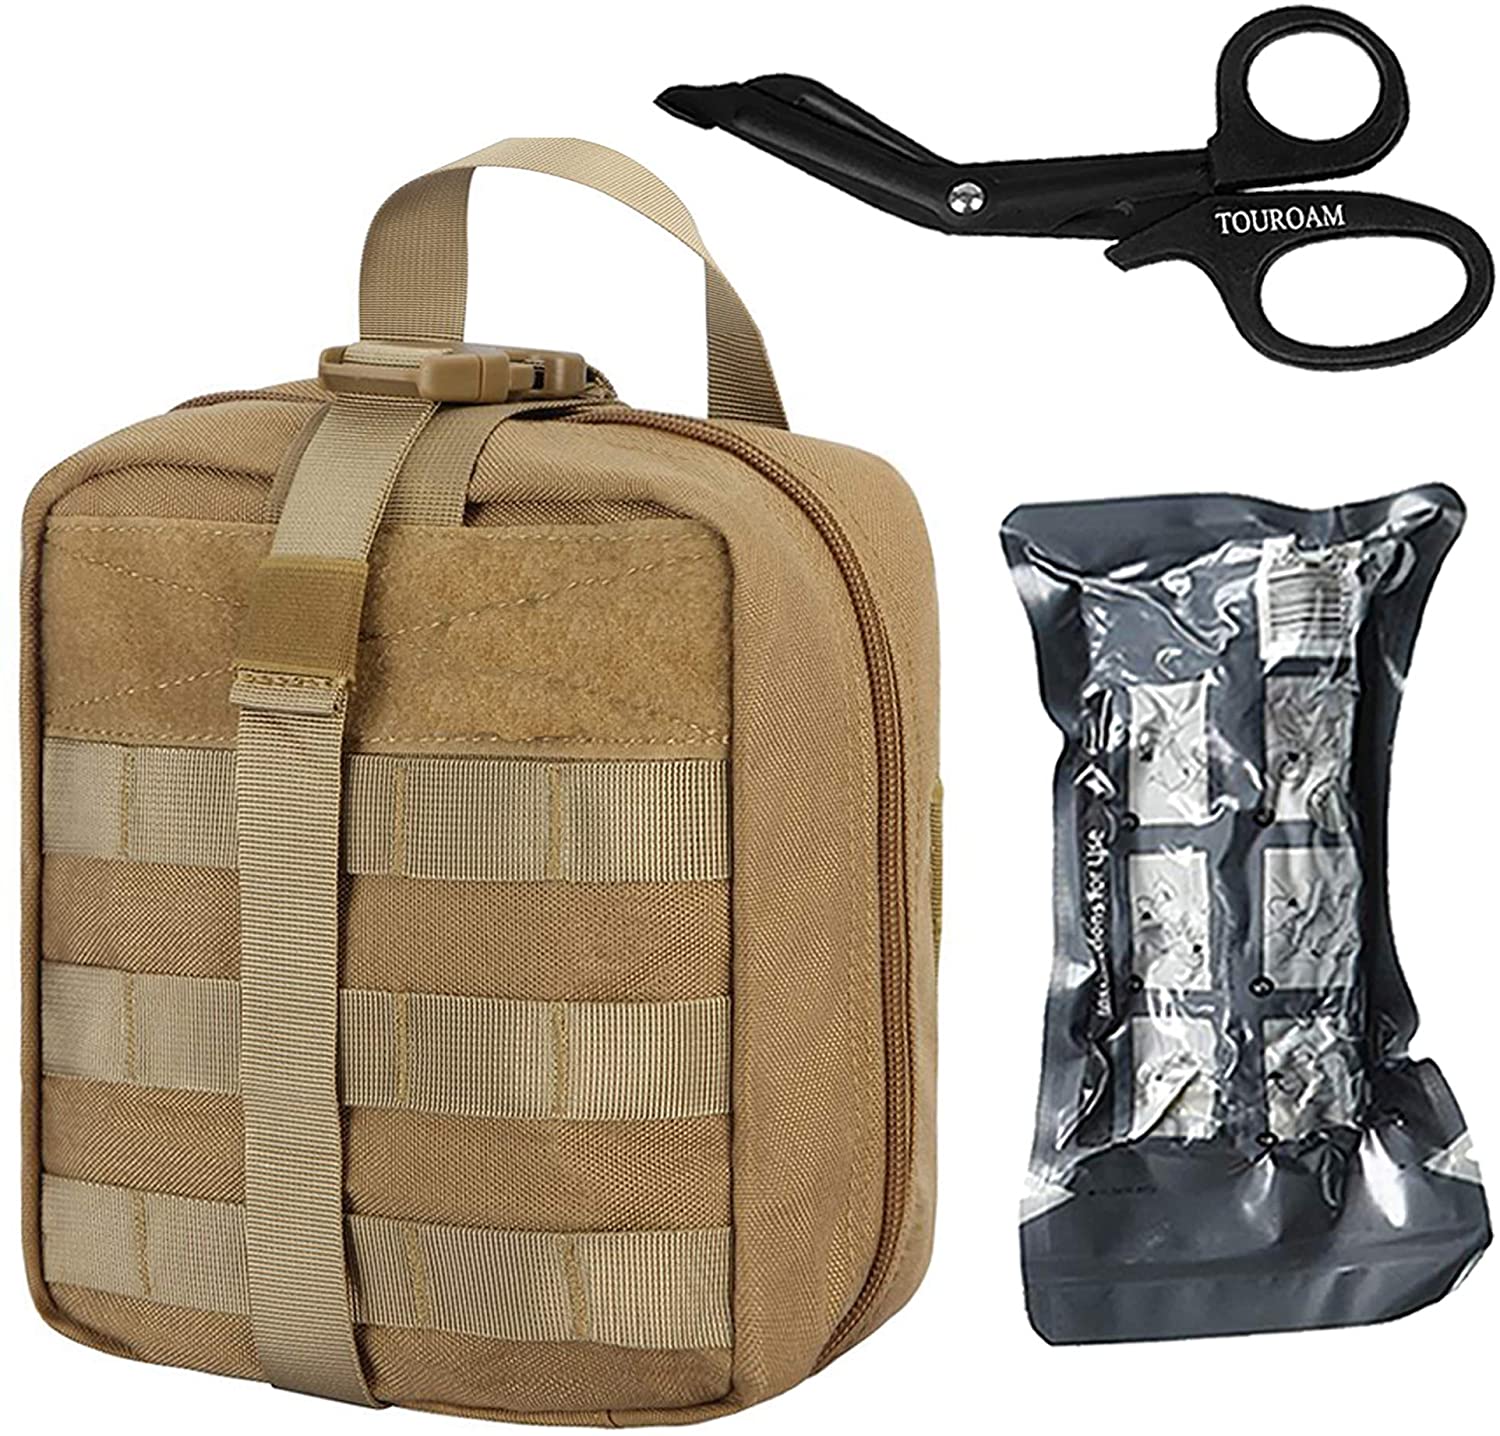 Tactical MOLLE Admin Pouch First Aid Kit-Emergency Survival